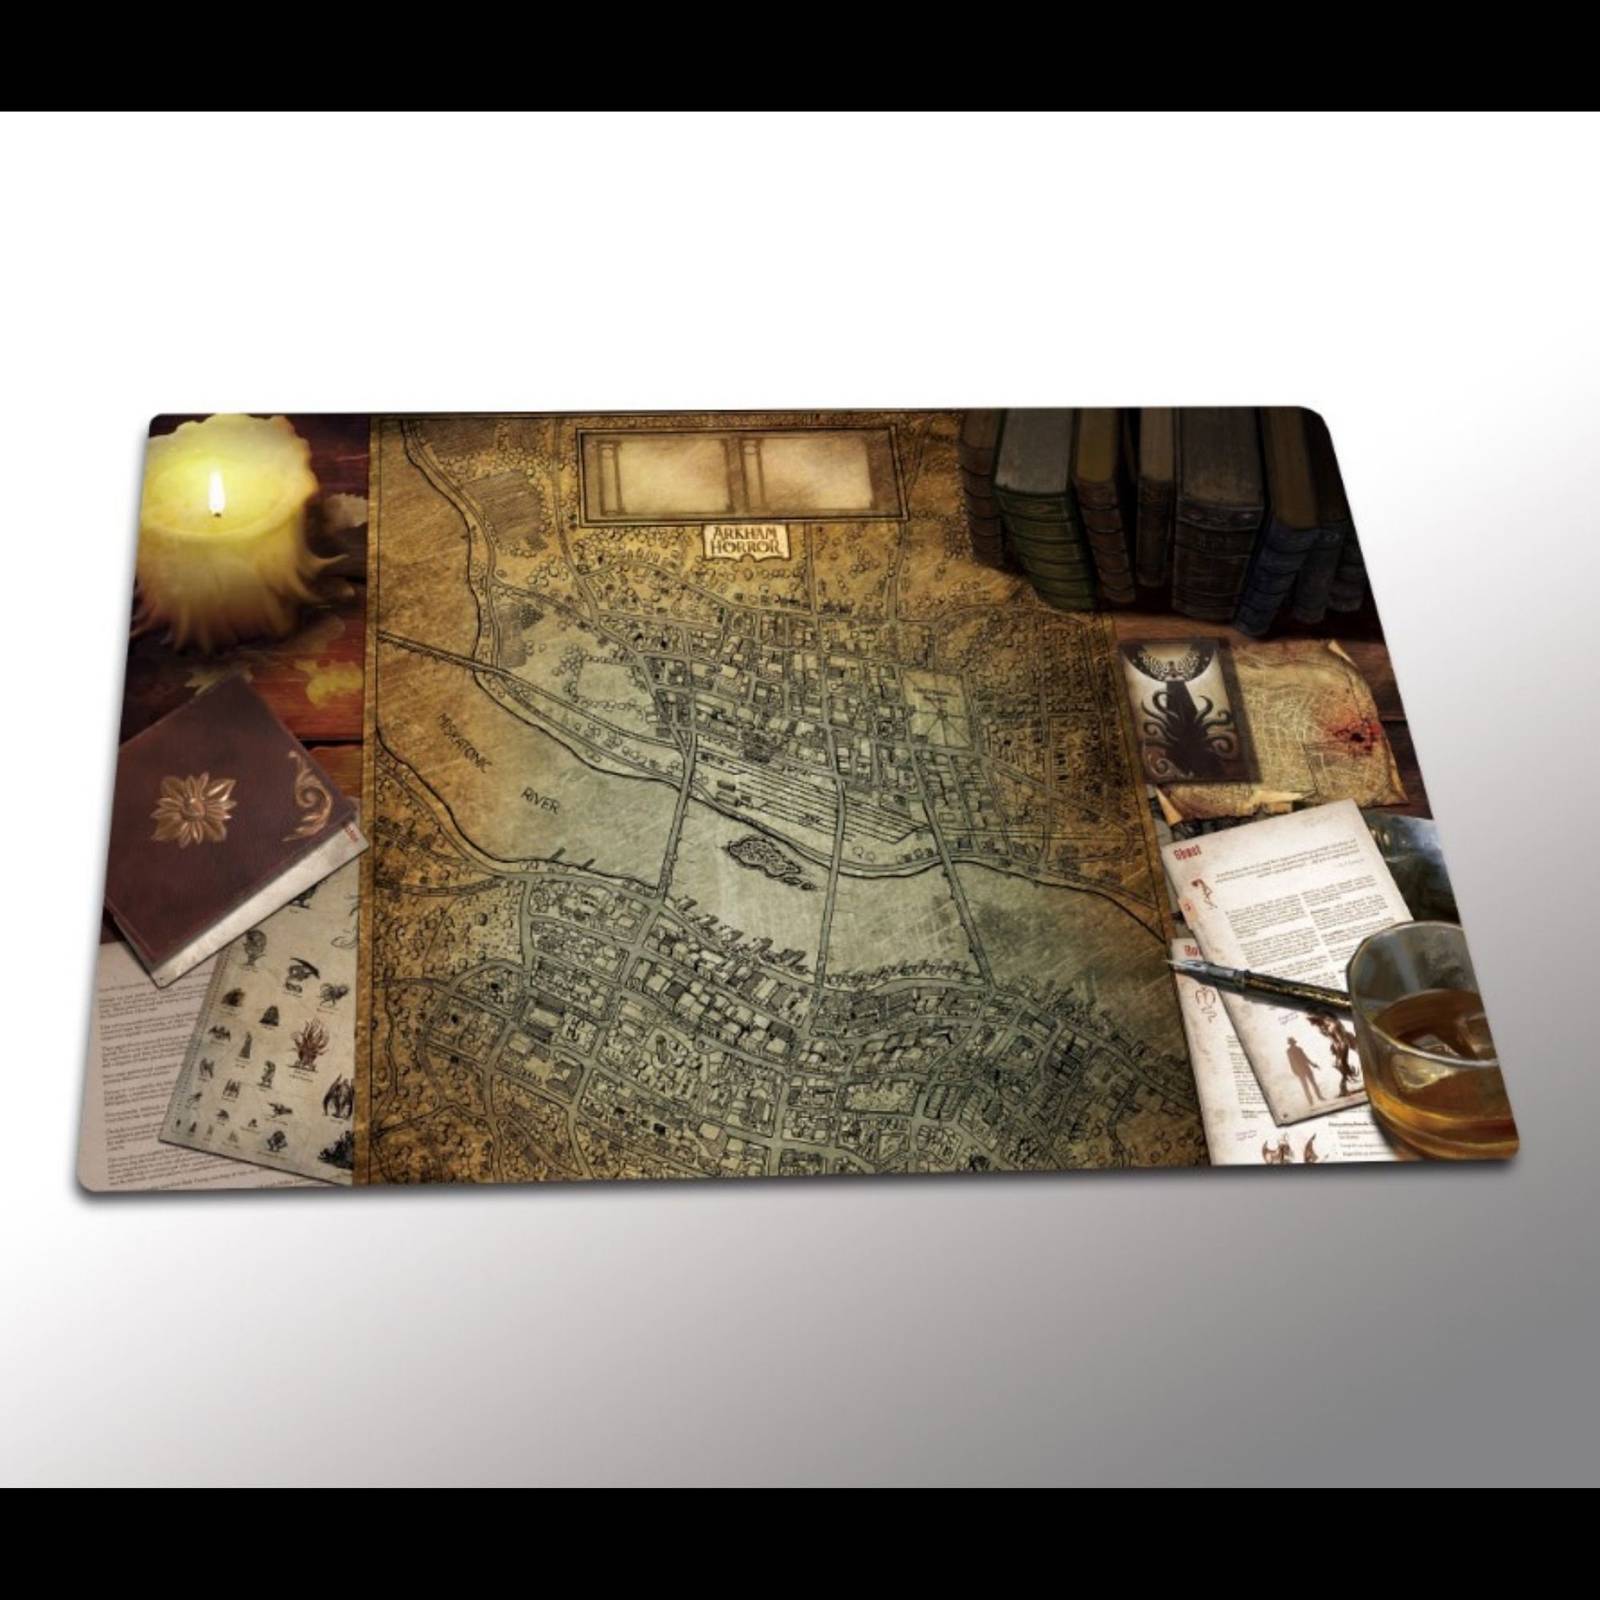 Self-designed | Arkham Horror the card game Playmat | UNOFFICIAL PRODUCT